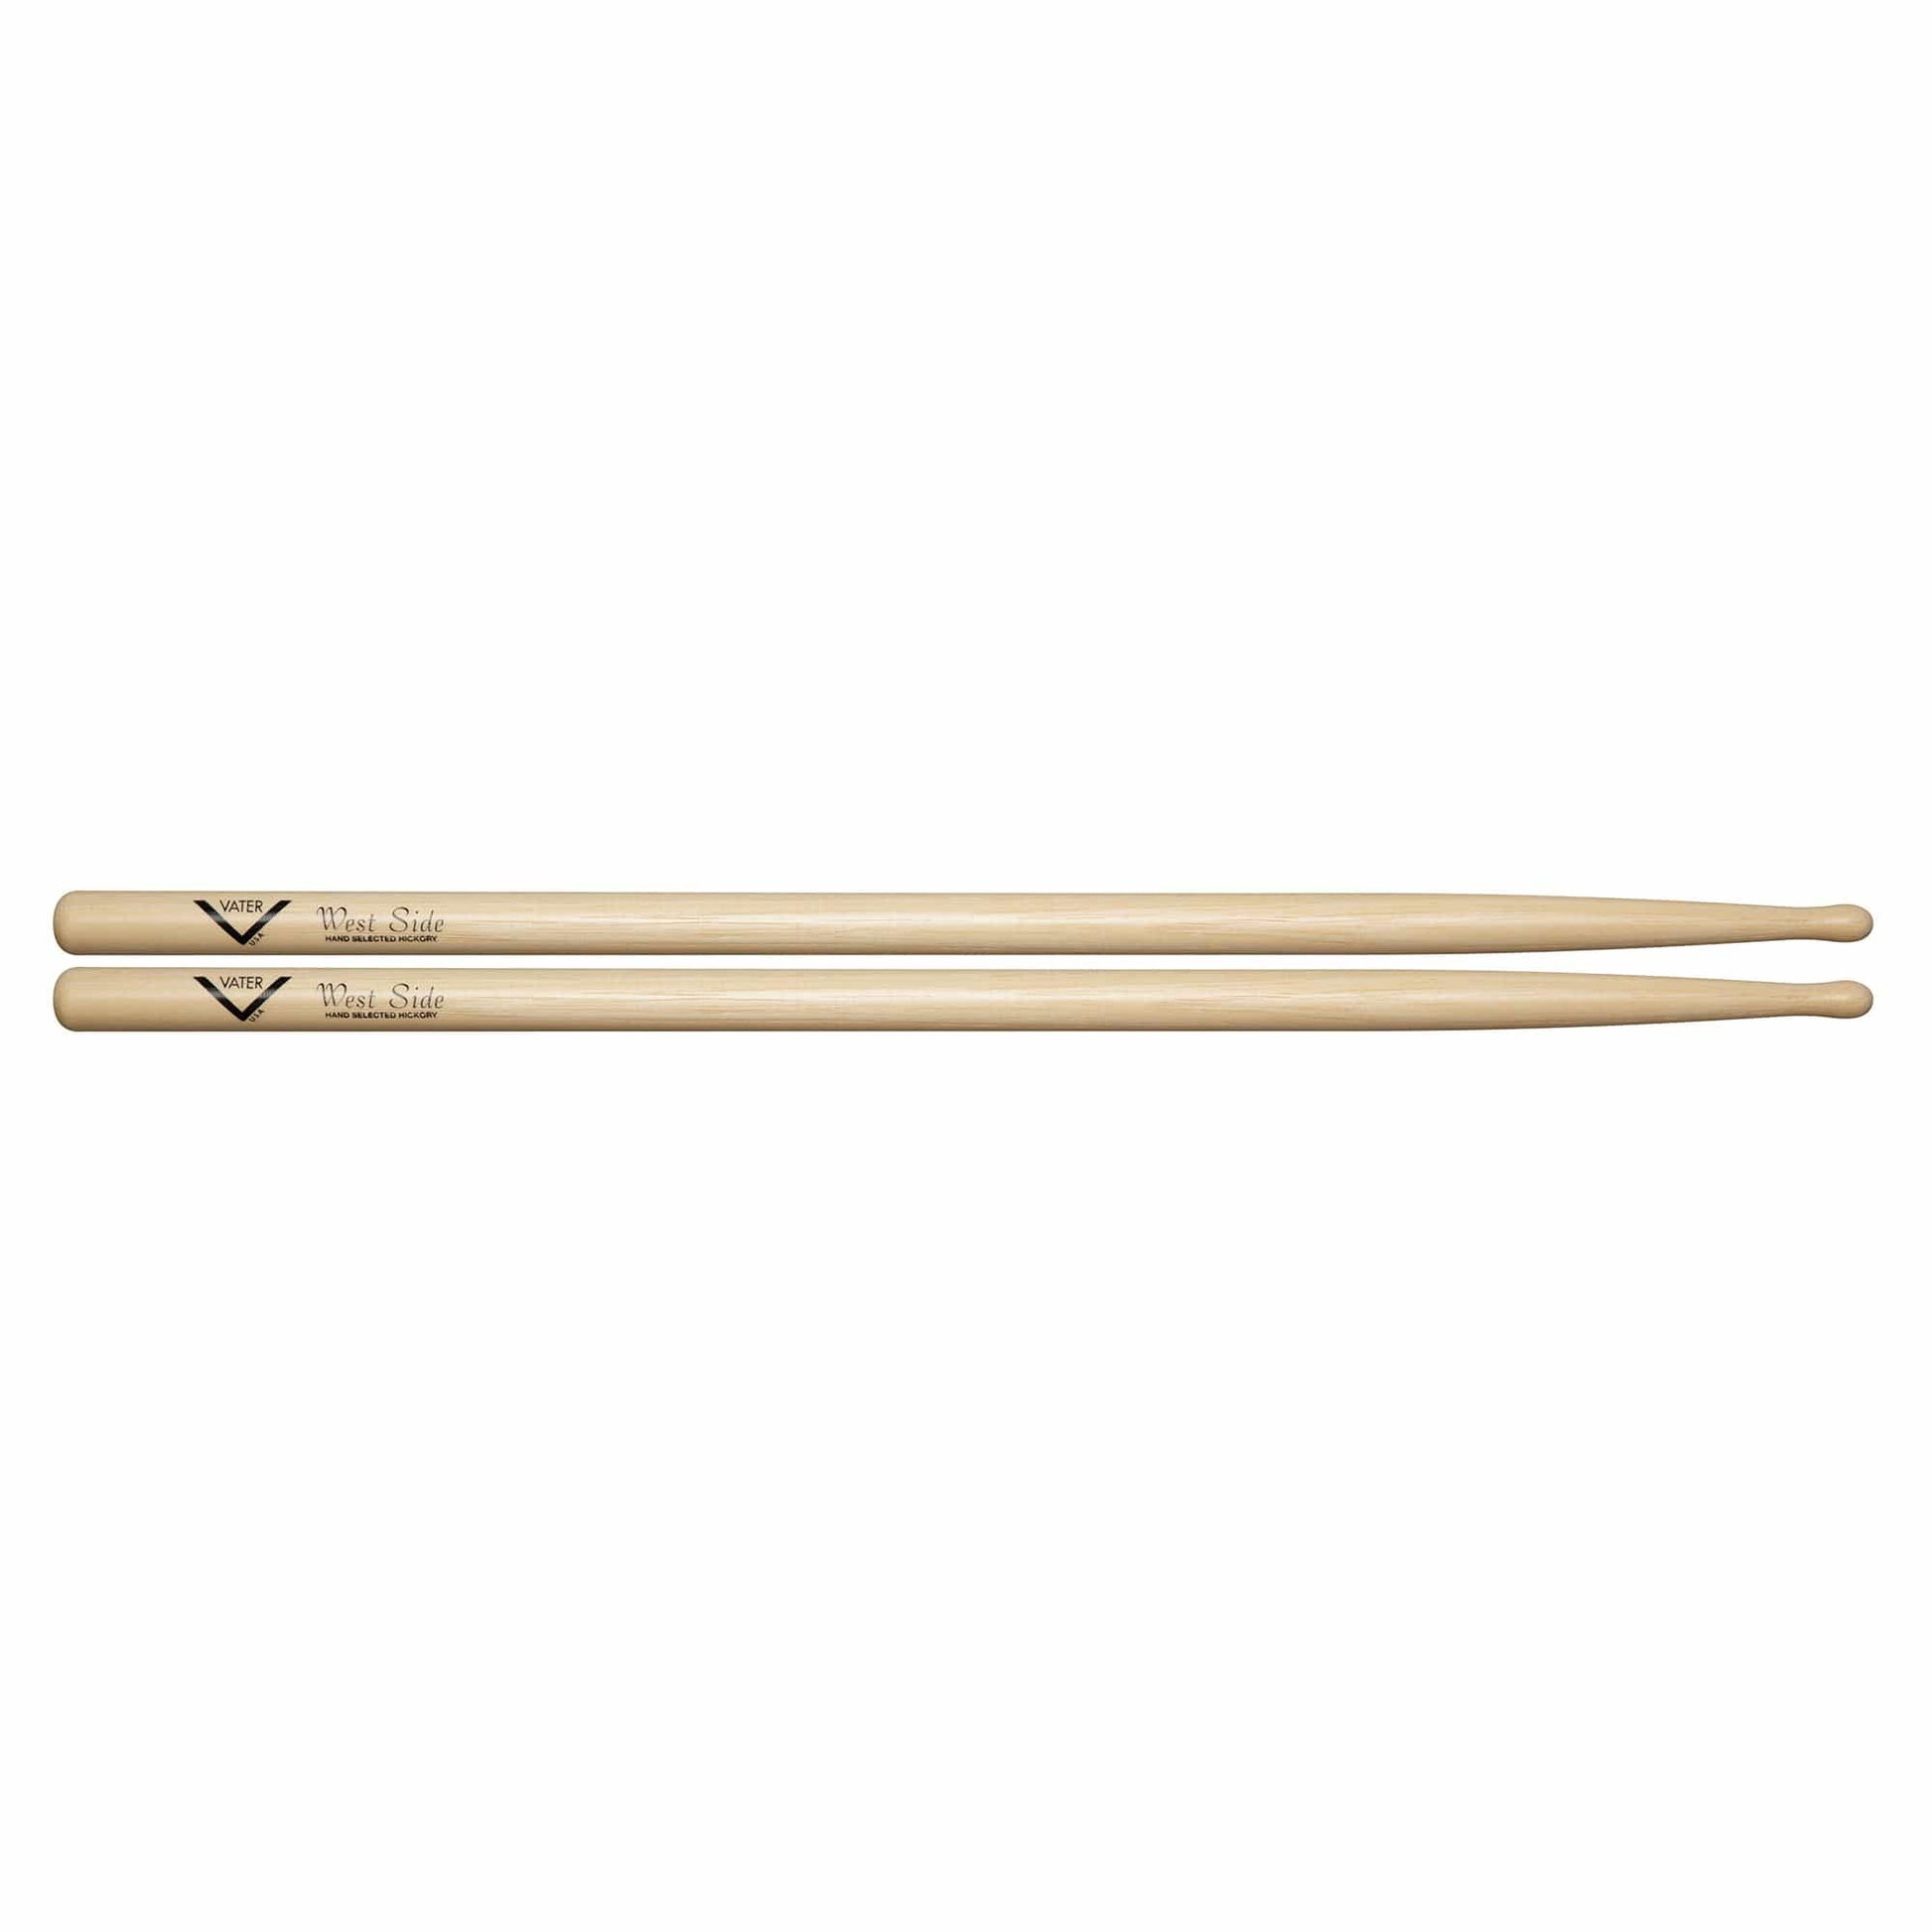 Vater Hickory West Side Wood Tip Drum Sticks Drums and Percussion